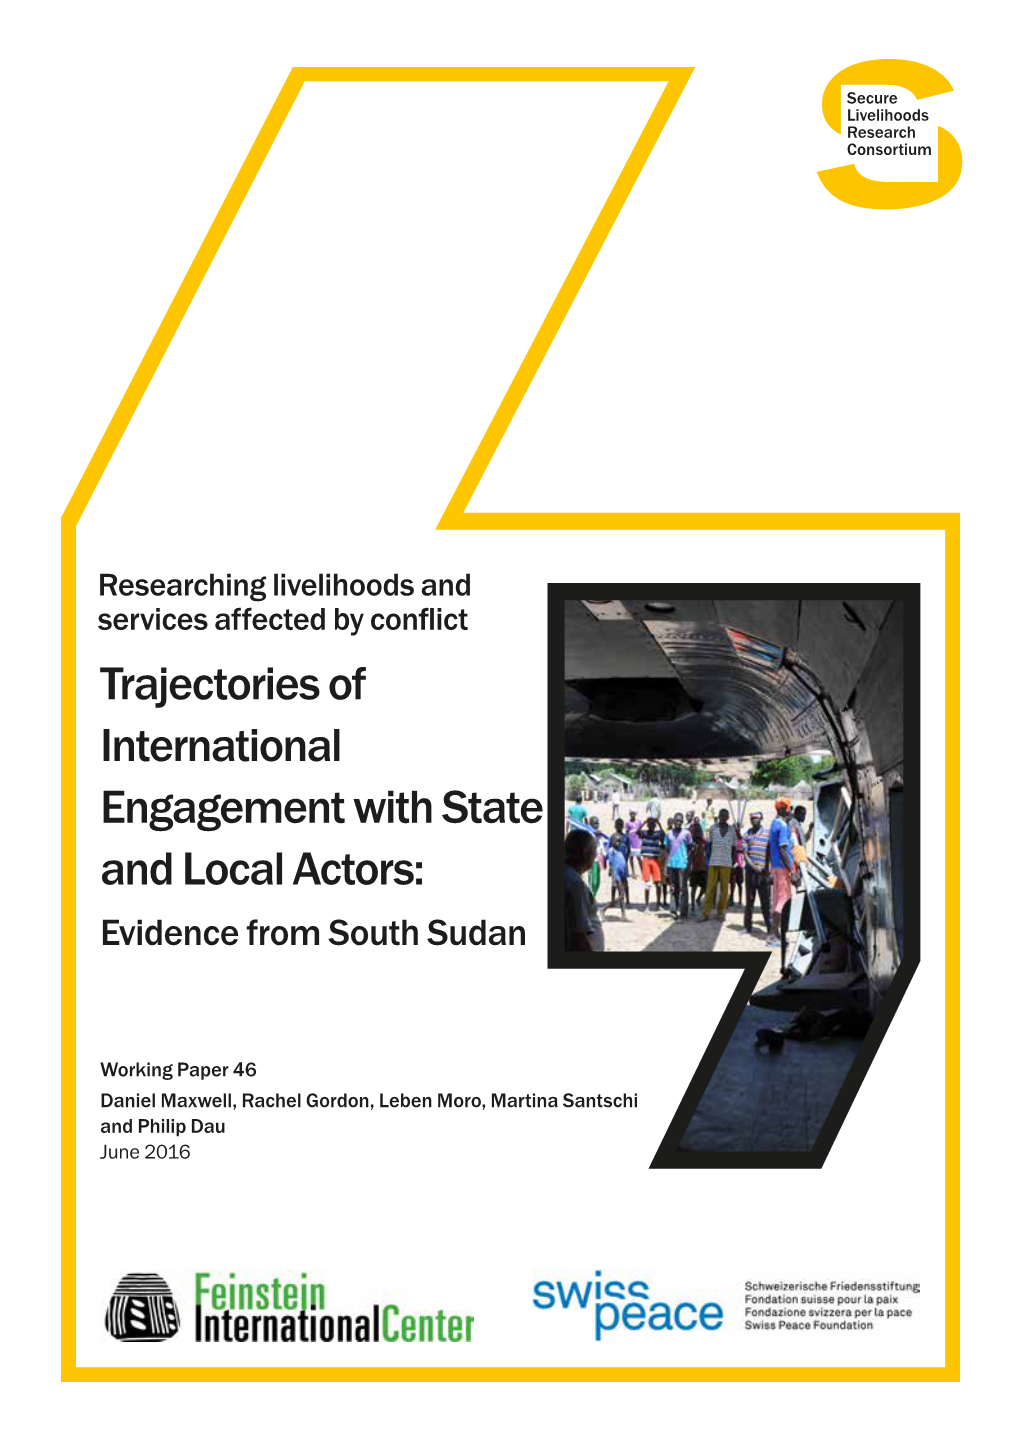 Trajectories of International Engagement with State and Local Actors: Evidence from South Sudan